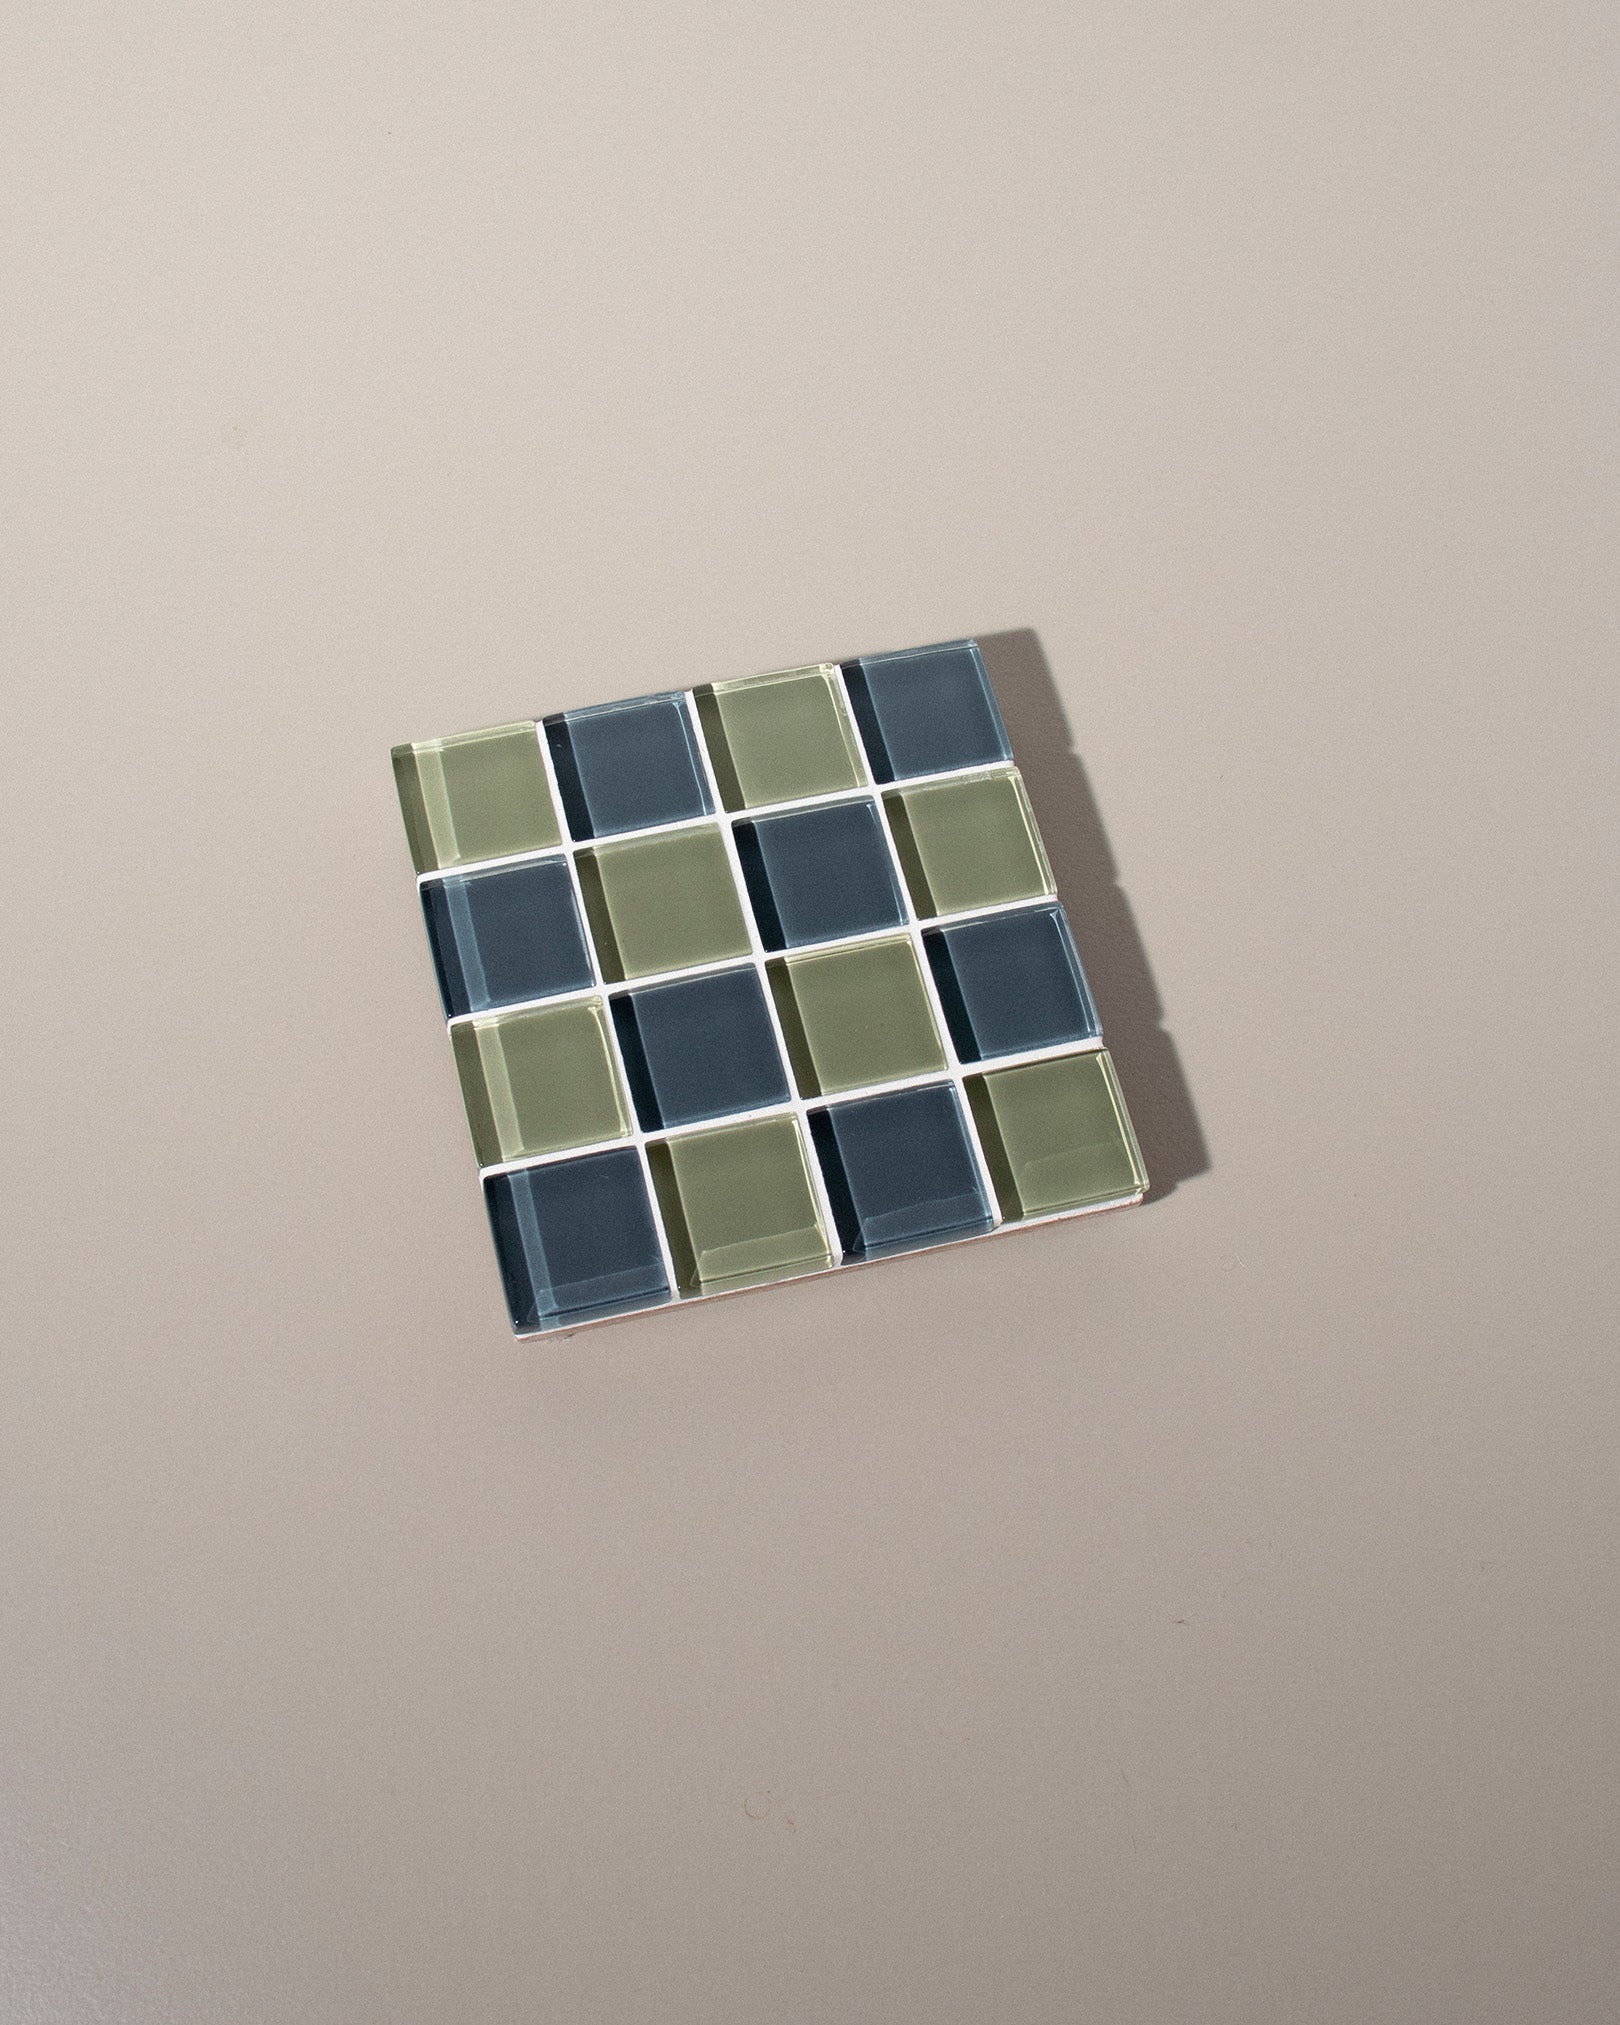 GLASS TILE COASTER - Dusted Moss